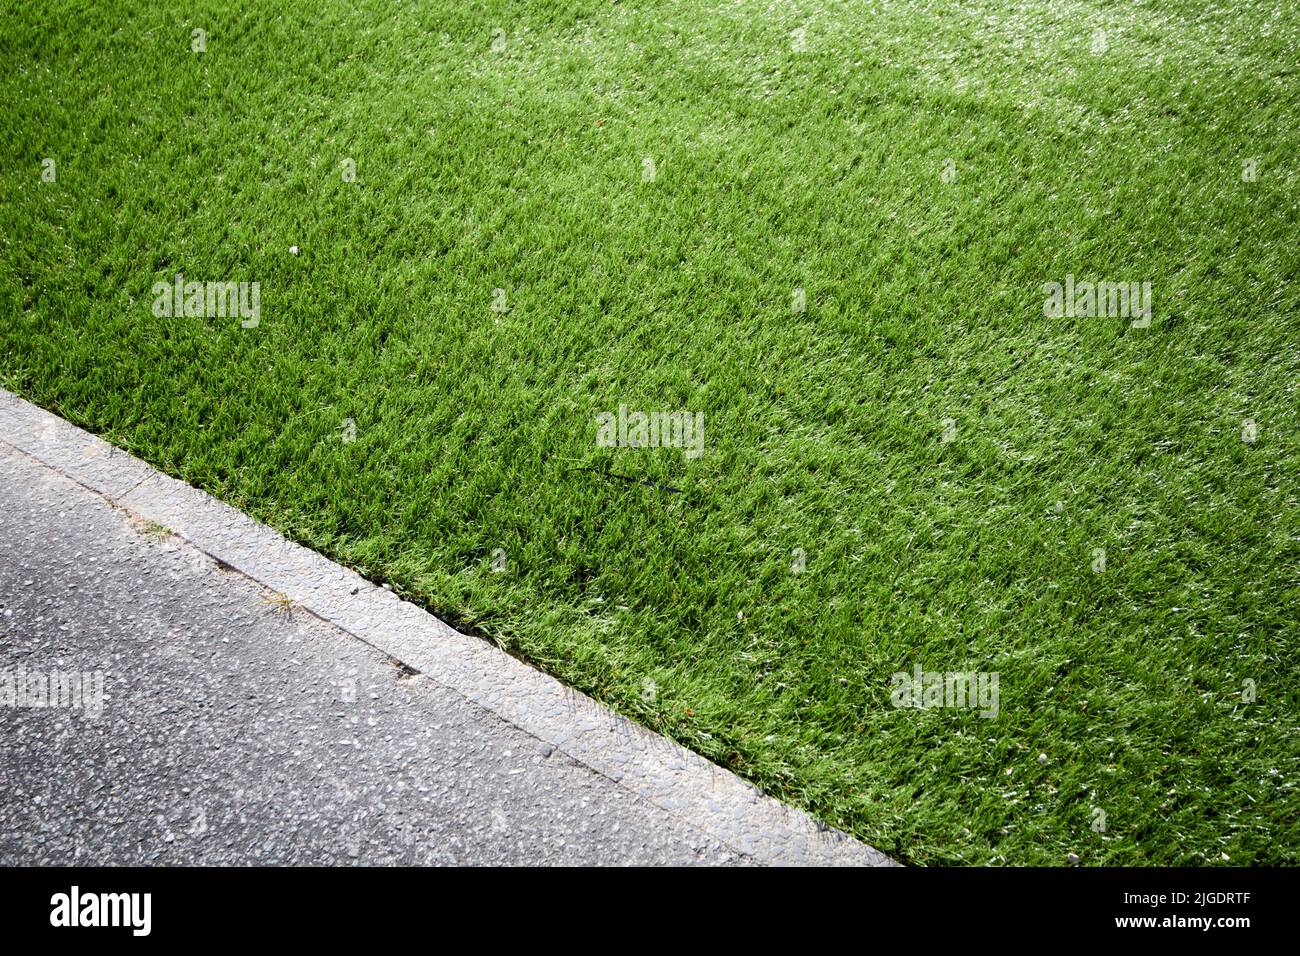 laying artificial grass in a garden in the uk Stock Photo